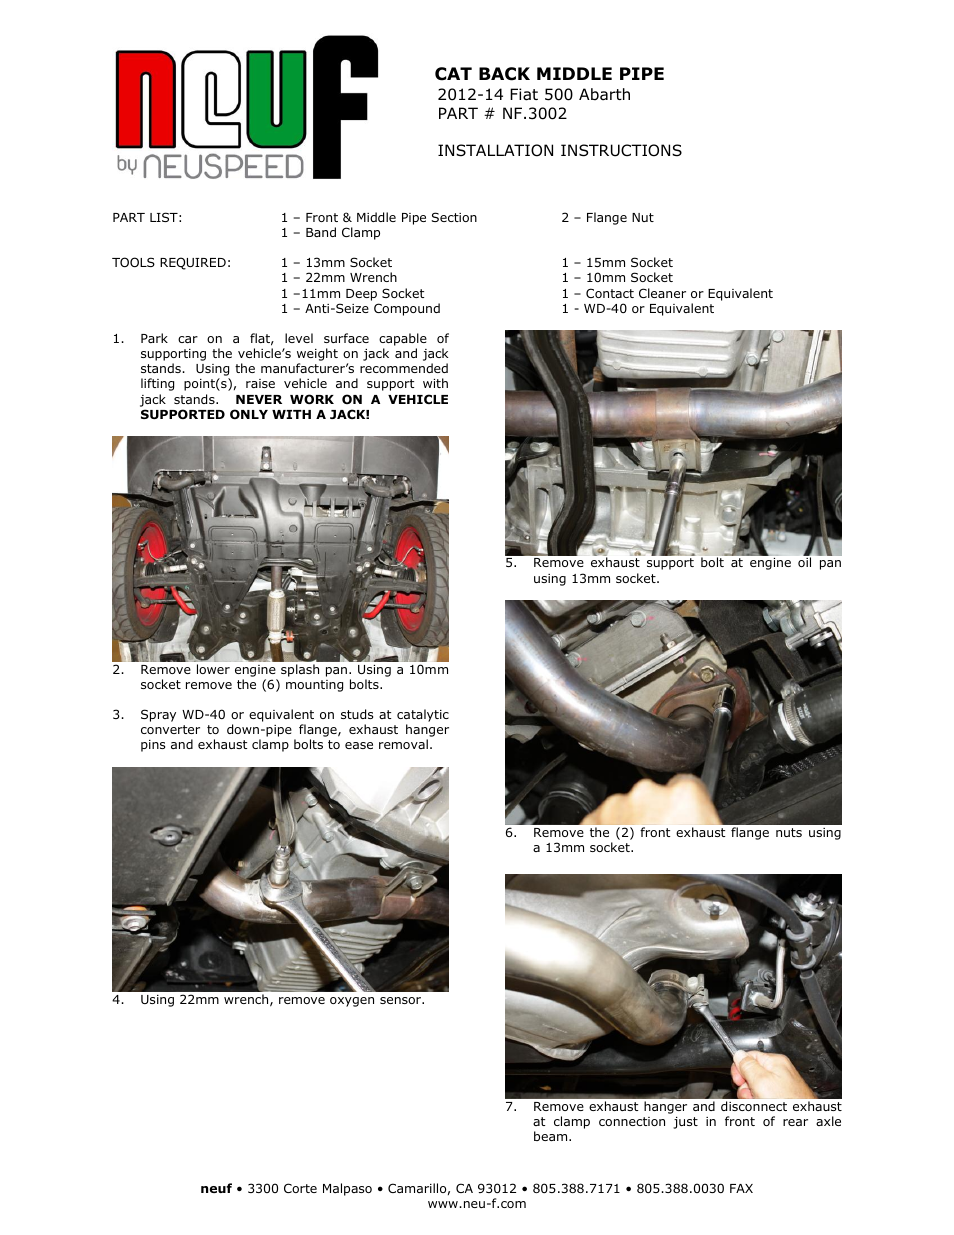 Neu-F NF.3001 User Manual | 2 pages